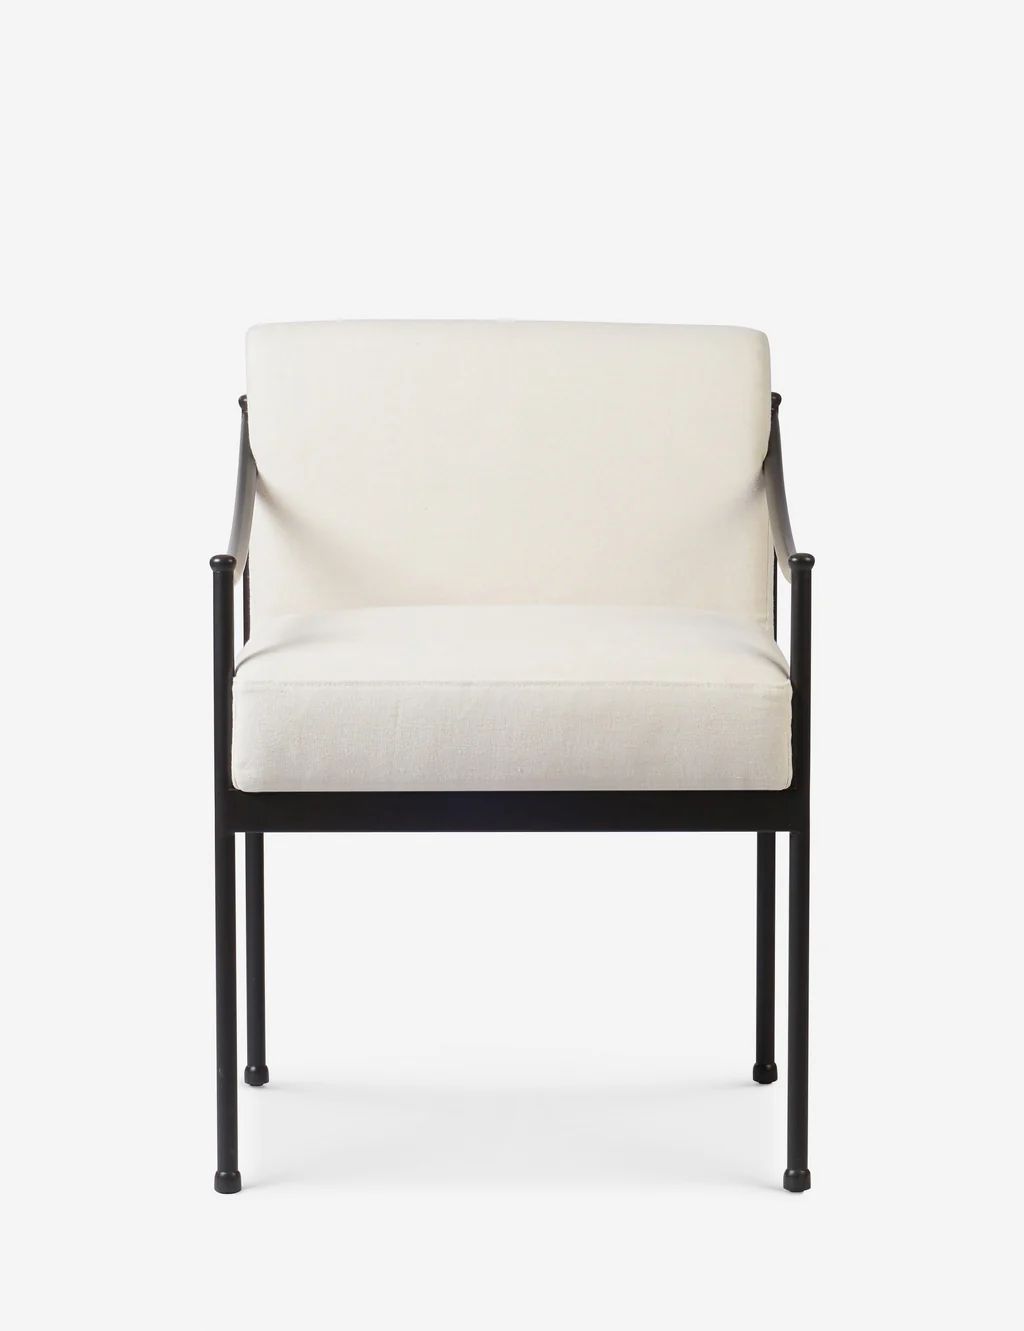 Granger Indoor / Outdoor Dining Chair by Amber Lewis x Four Hands | Lulu and Georgia 